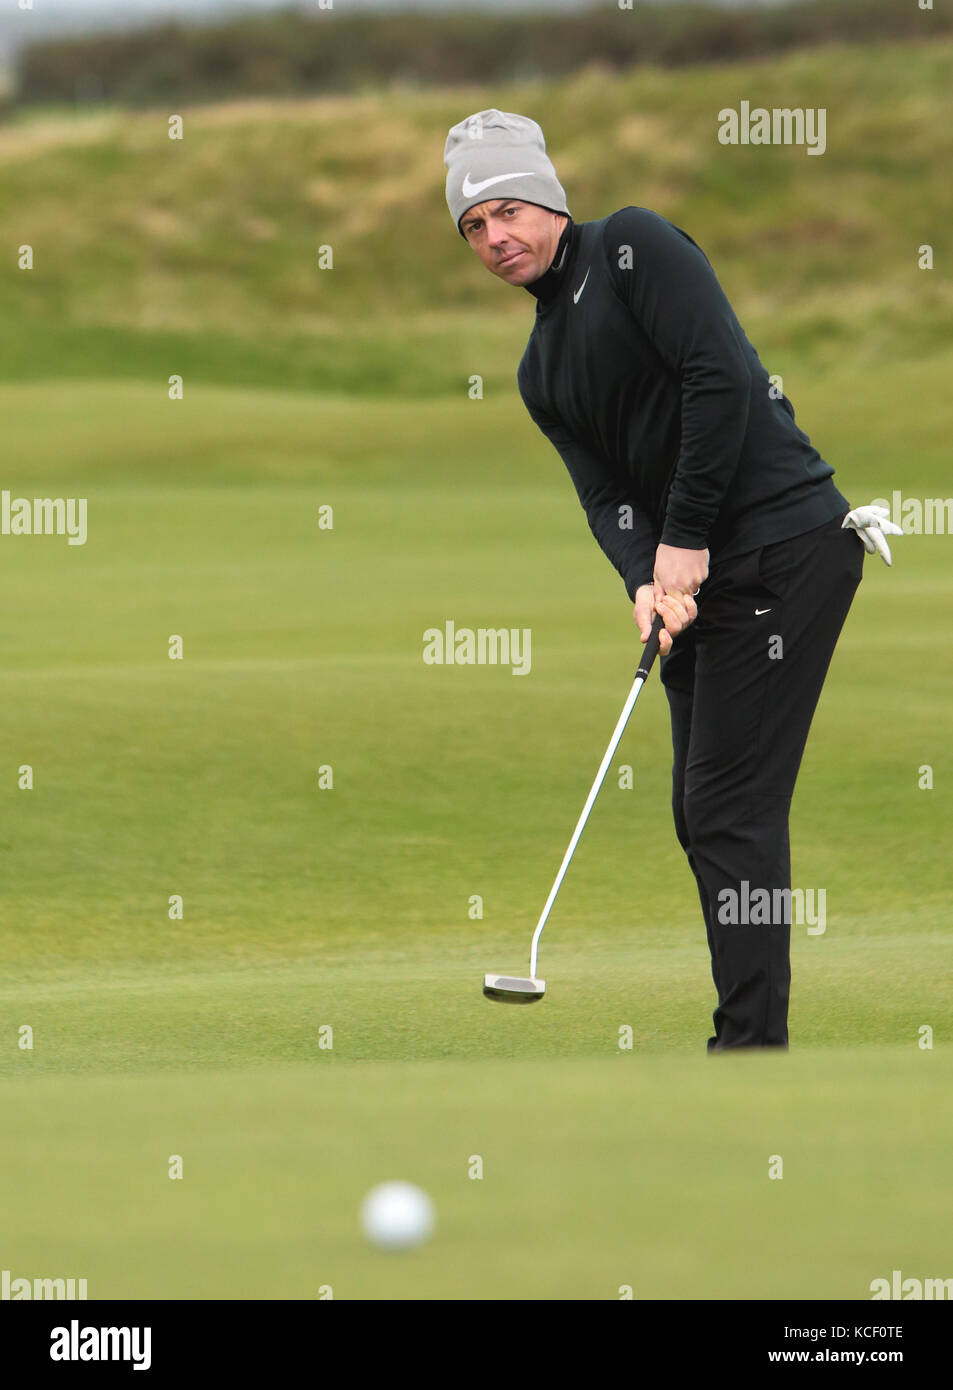 St Andrews, Fife, Scotland, UK. 4th October, 2017. The Alfred Dunhill Links Golf Championship. Rory McIlroy, plays a pratice round at The Alfred dunhill Cup, St Andrews fife Scotland, uk Wednesday 4th of October 2017 Credit: Derek Allan/Alamy Live News Stock Photo